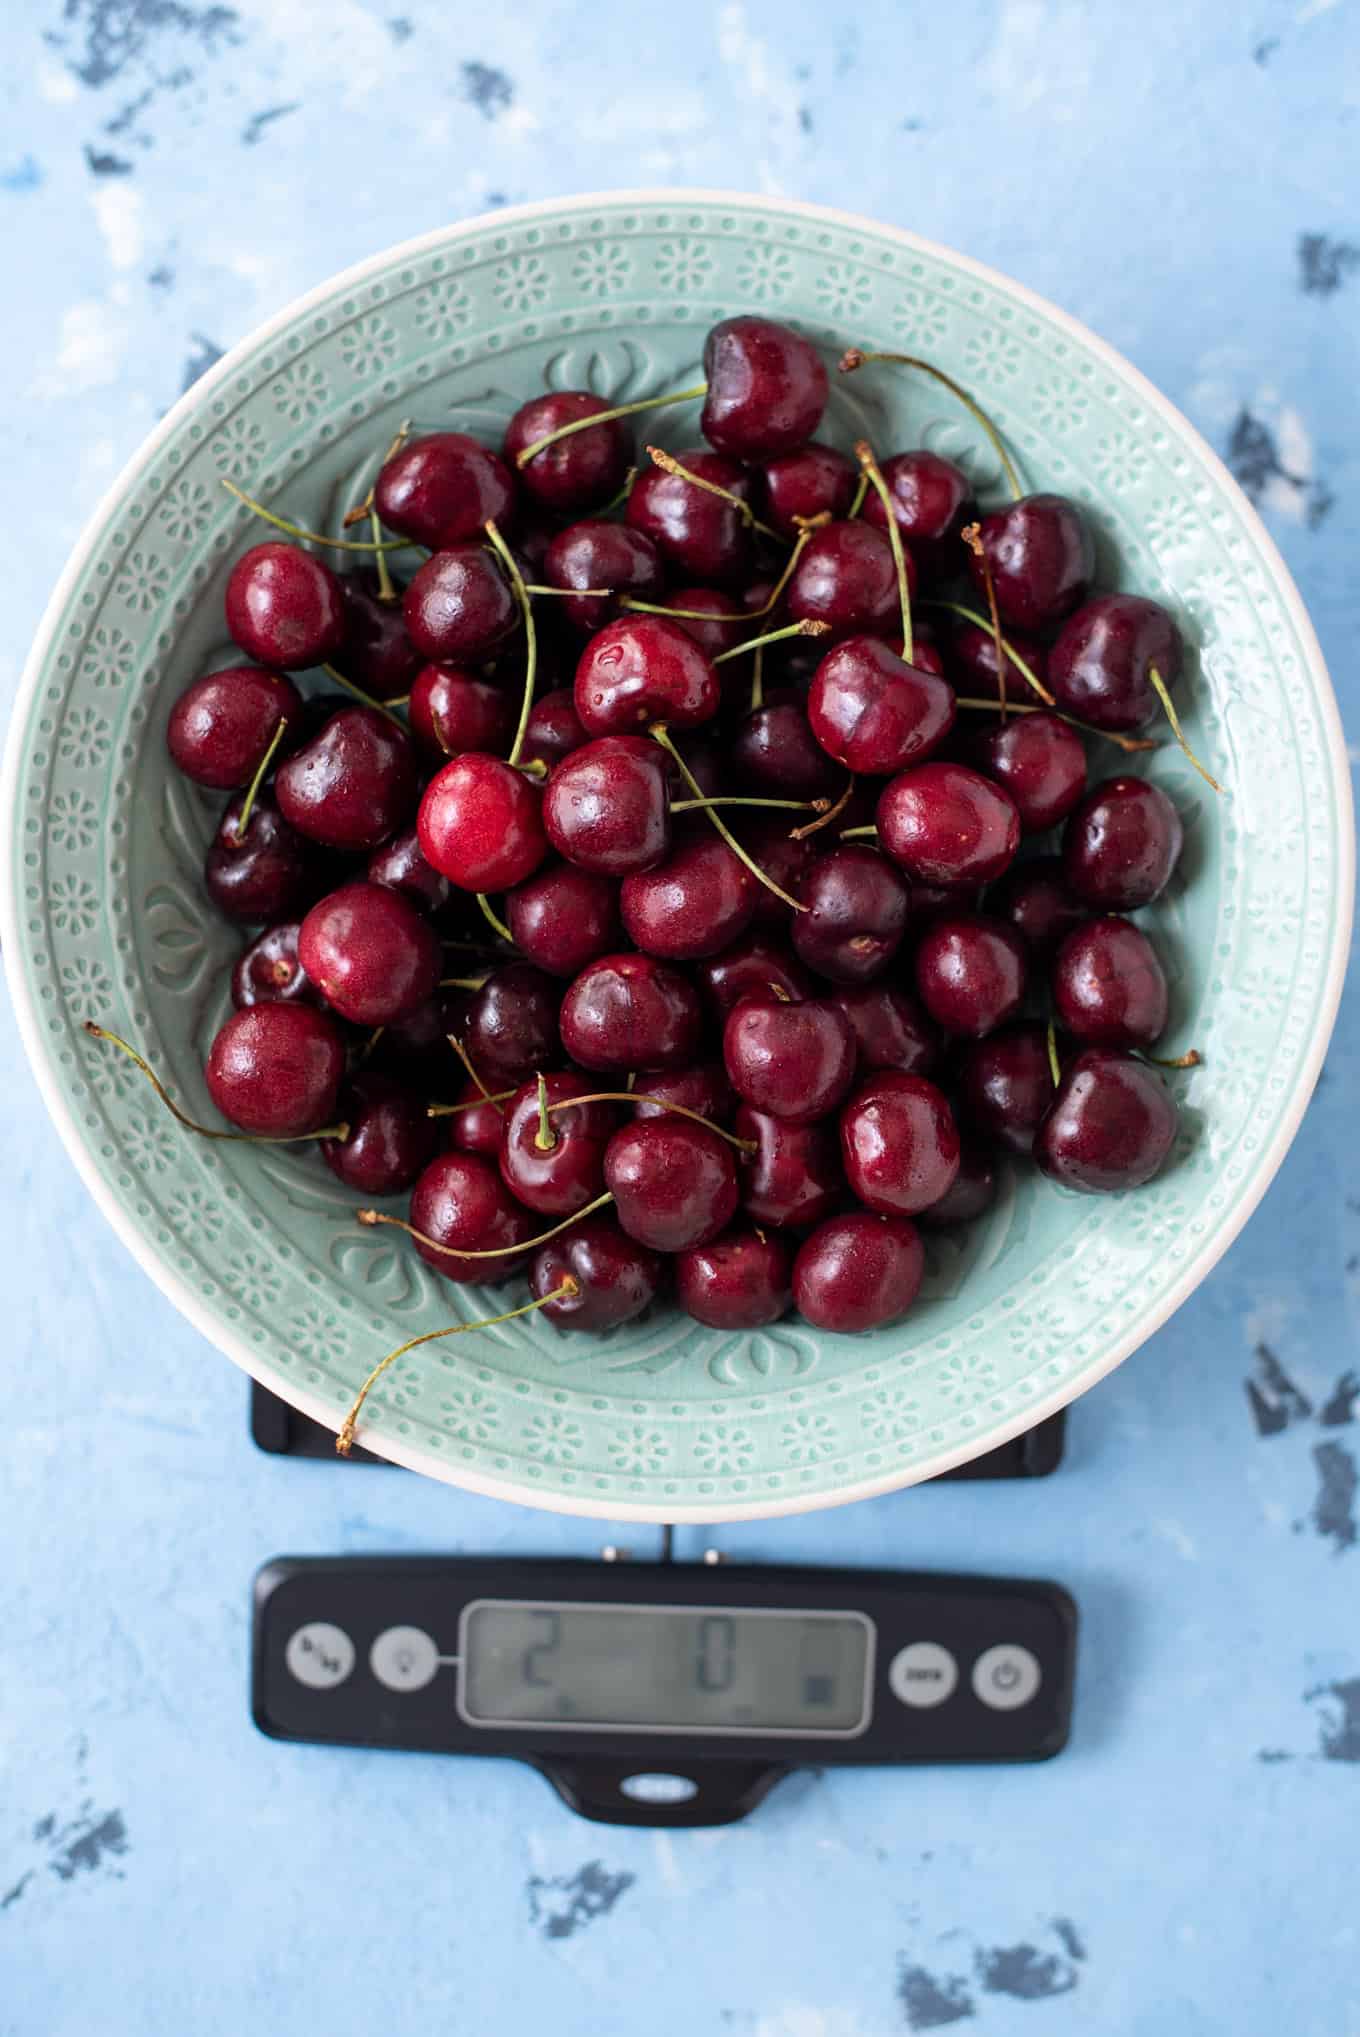 Cherries in a bowl on a food scale. 